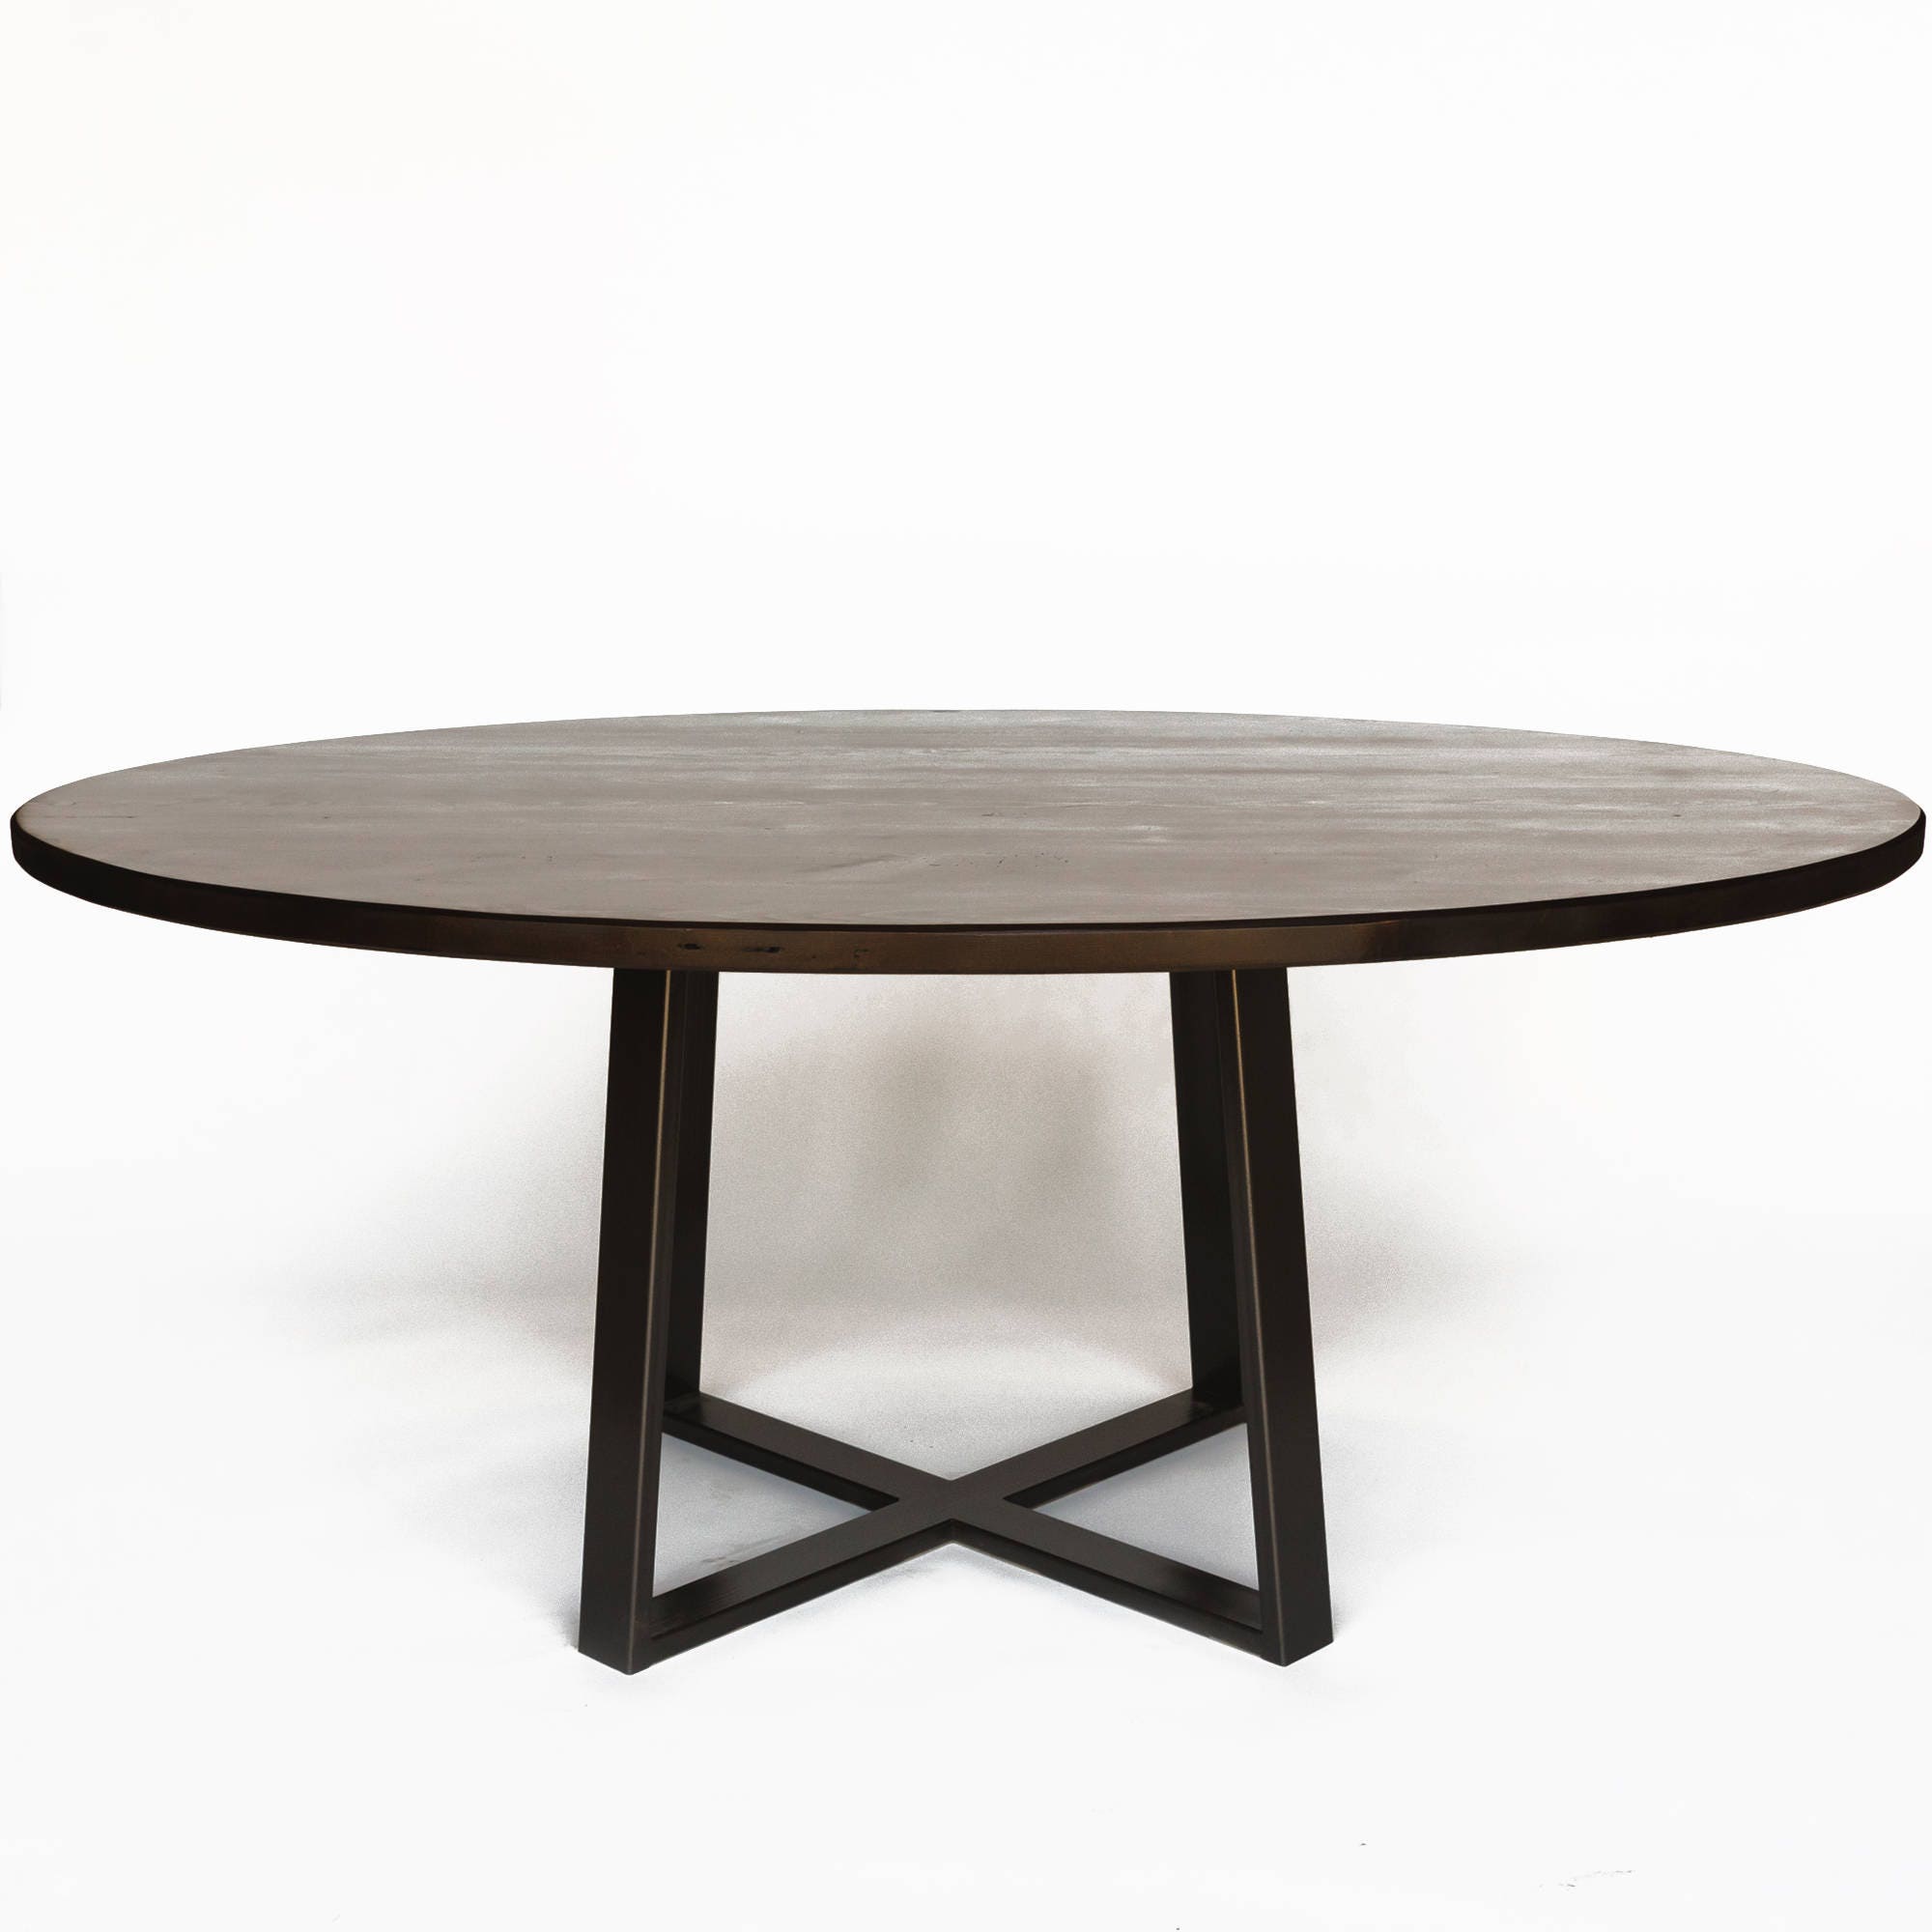 Large Round Dining Table Or, Large Round Or Oval Dining Tables